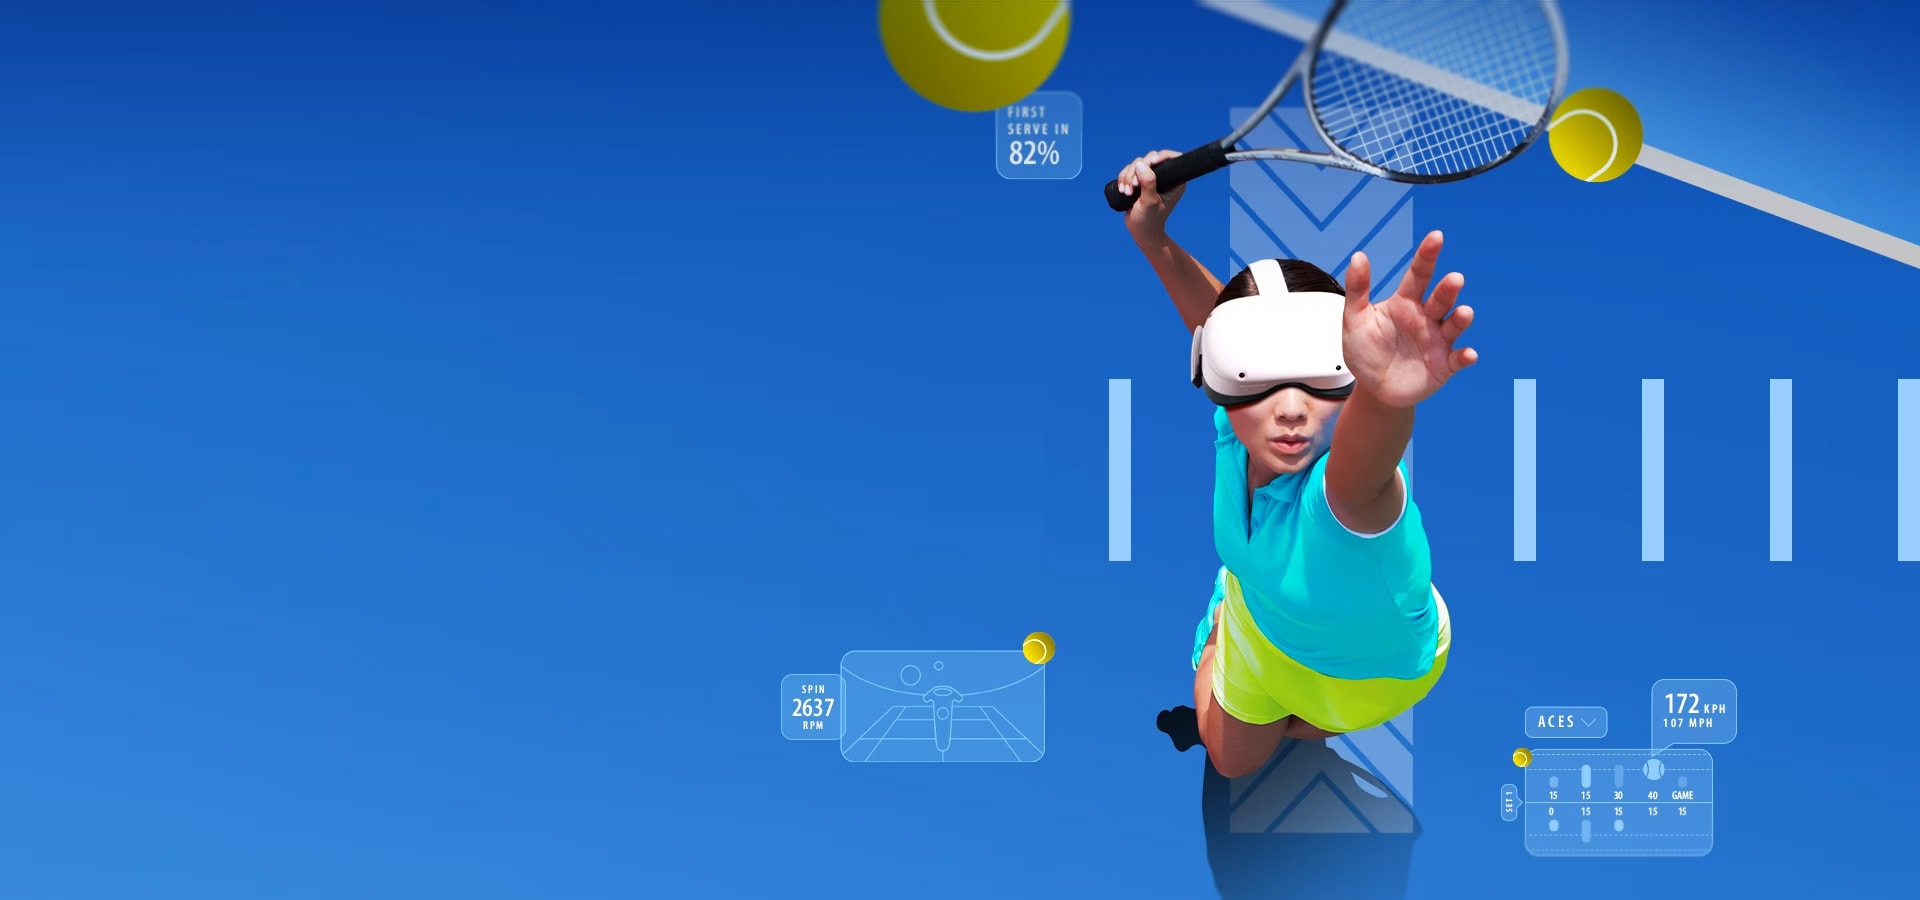 Infosys serves up purpose-driven digital innovations with sustainability off-court and AI on-court at the Australian Open 2023 